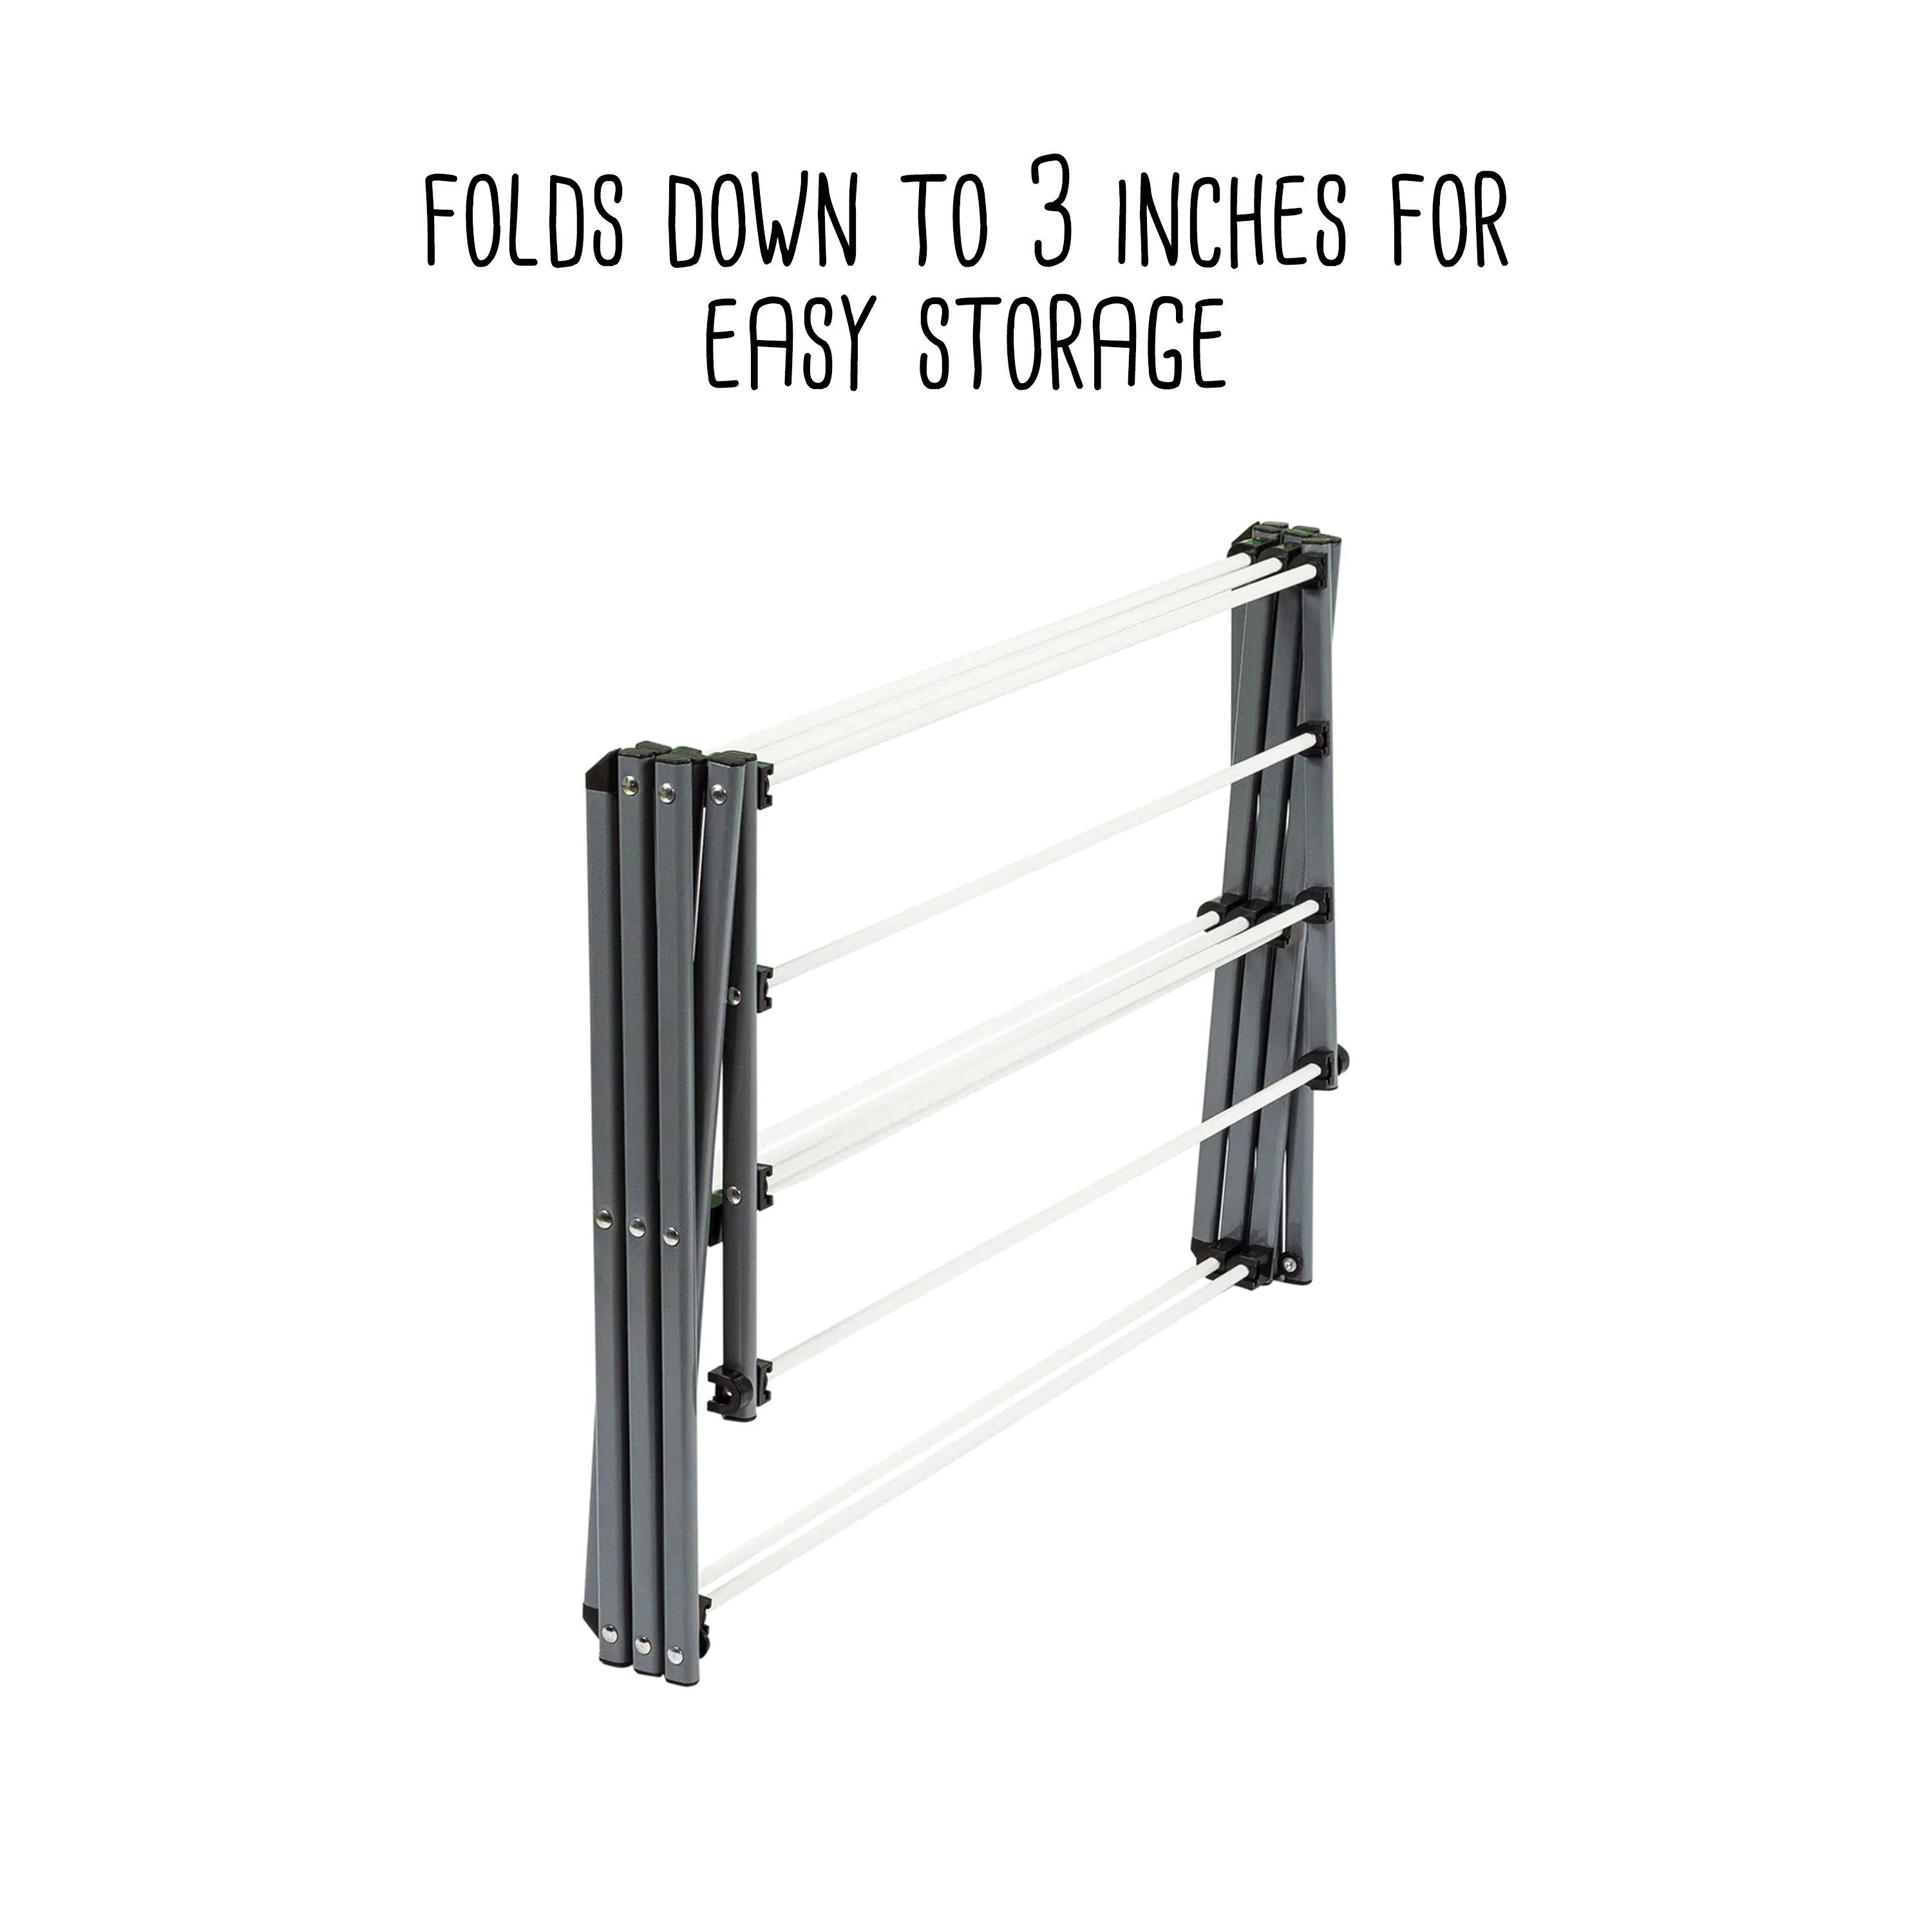 Fold-Away Wall-Mounted Clothes Drying Rack